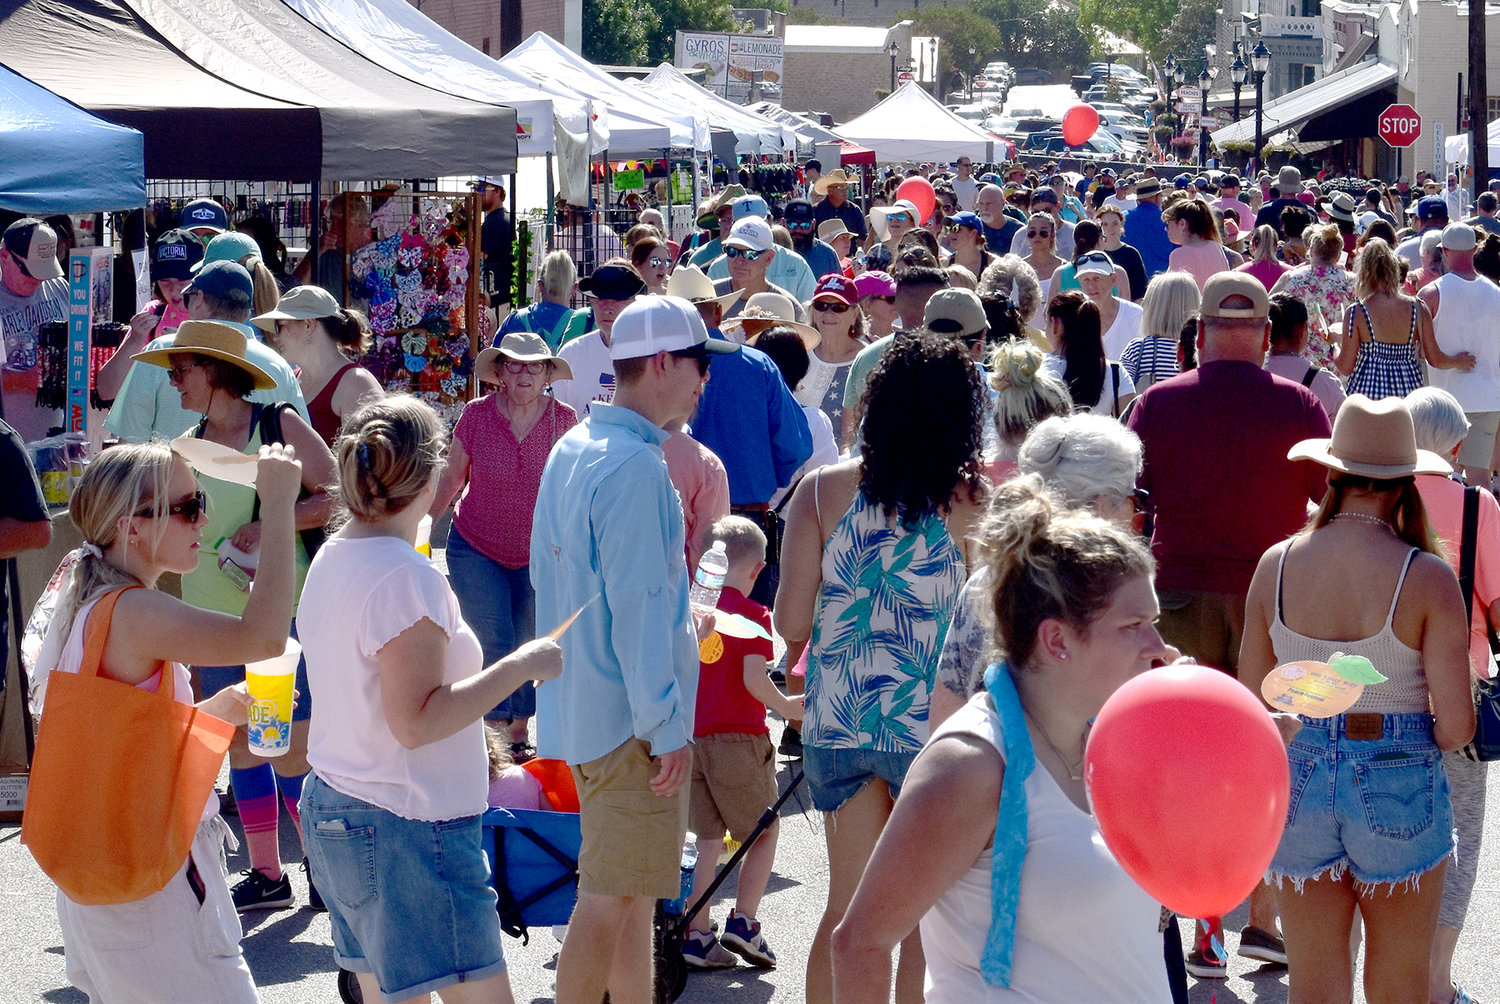 The Peach Festival drew a large crowd from the start of the day.